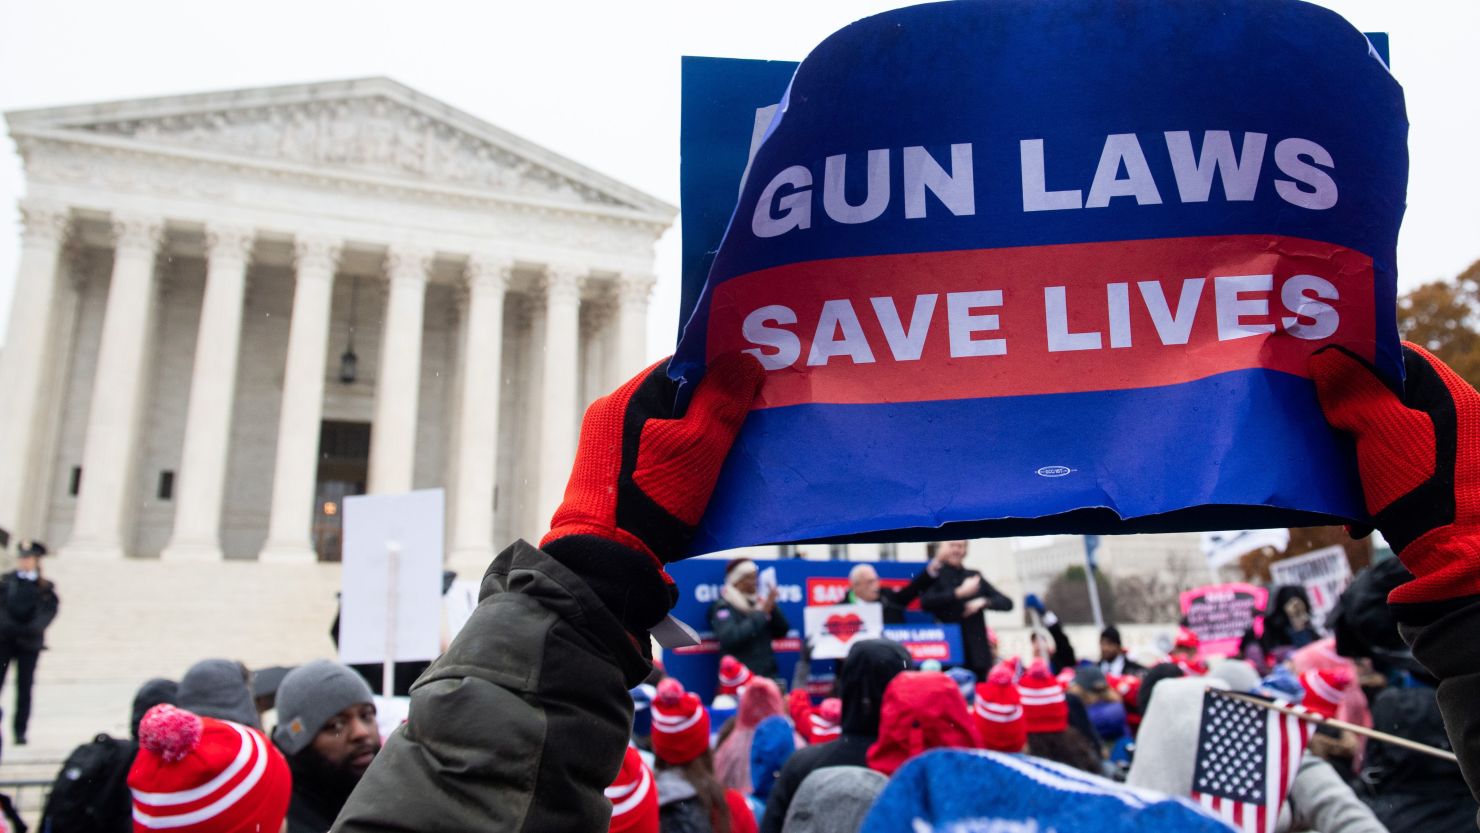 Supporters of gun control and firearm safety measures hold a protest rally outside the US Supreme Court.